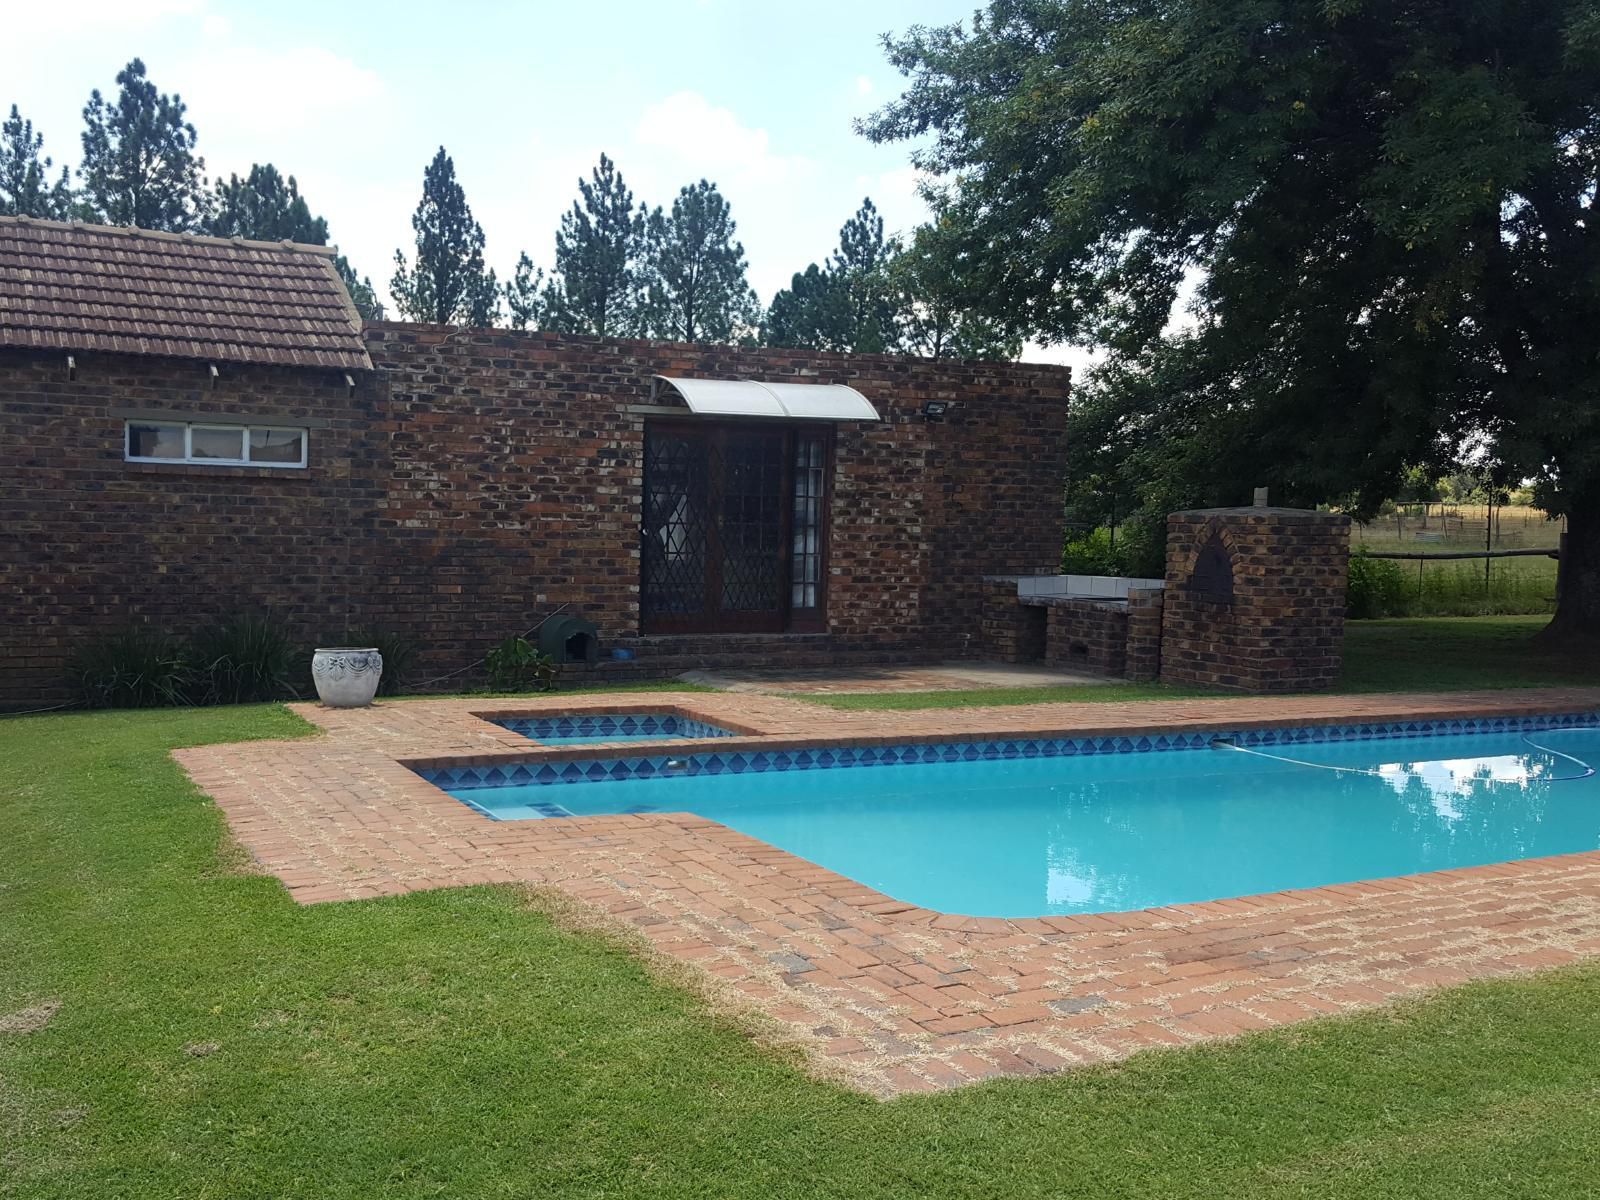 House Cottage And Contractors Manor Mooilande Vereeniging Gauteng South Africa House, Building, Architecture, Garden, Nature, Plant, Swimming Pool